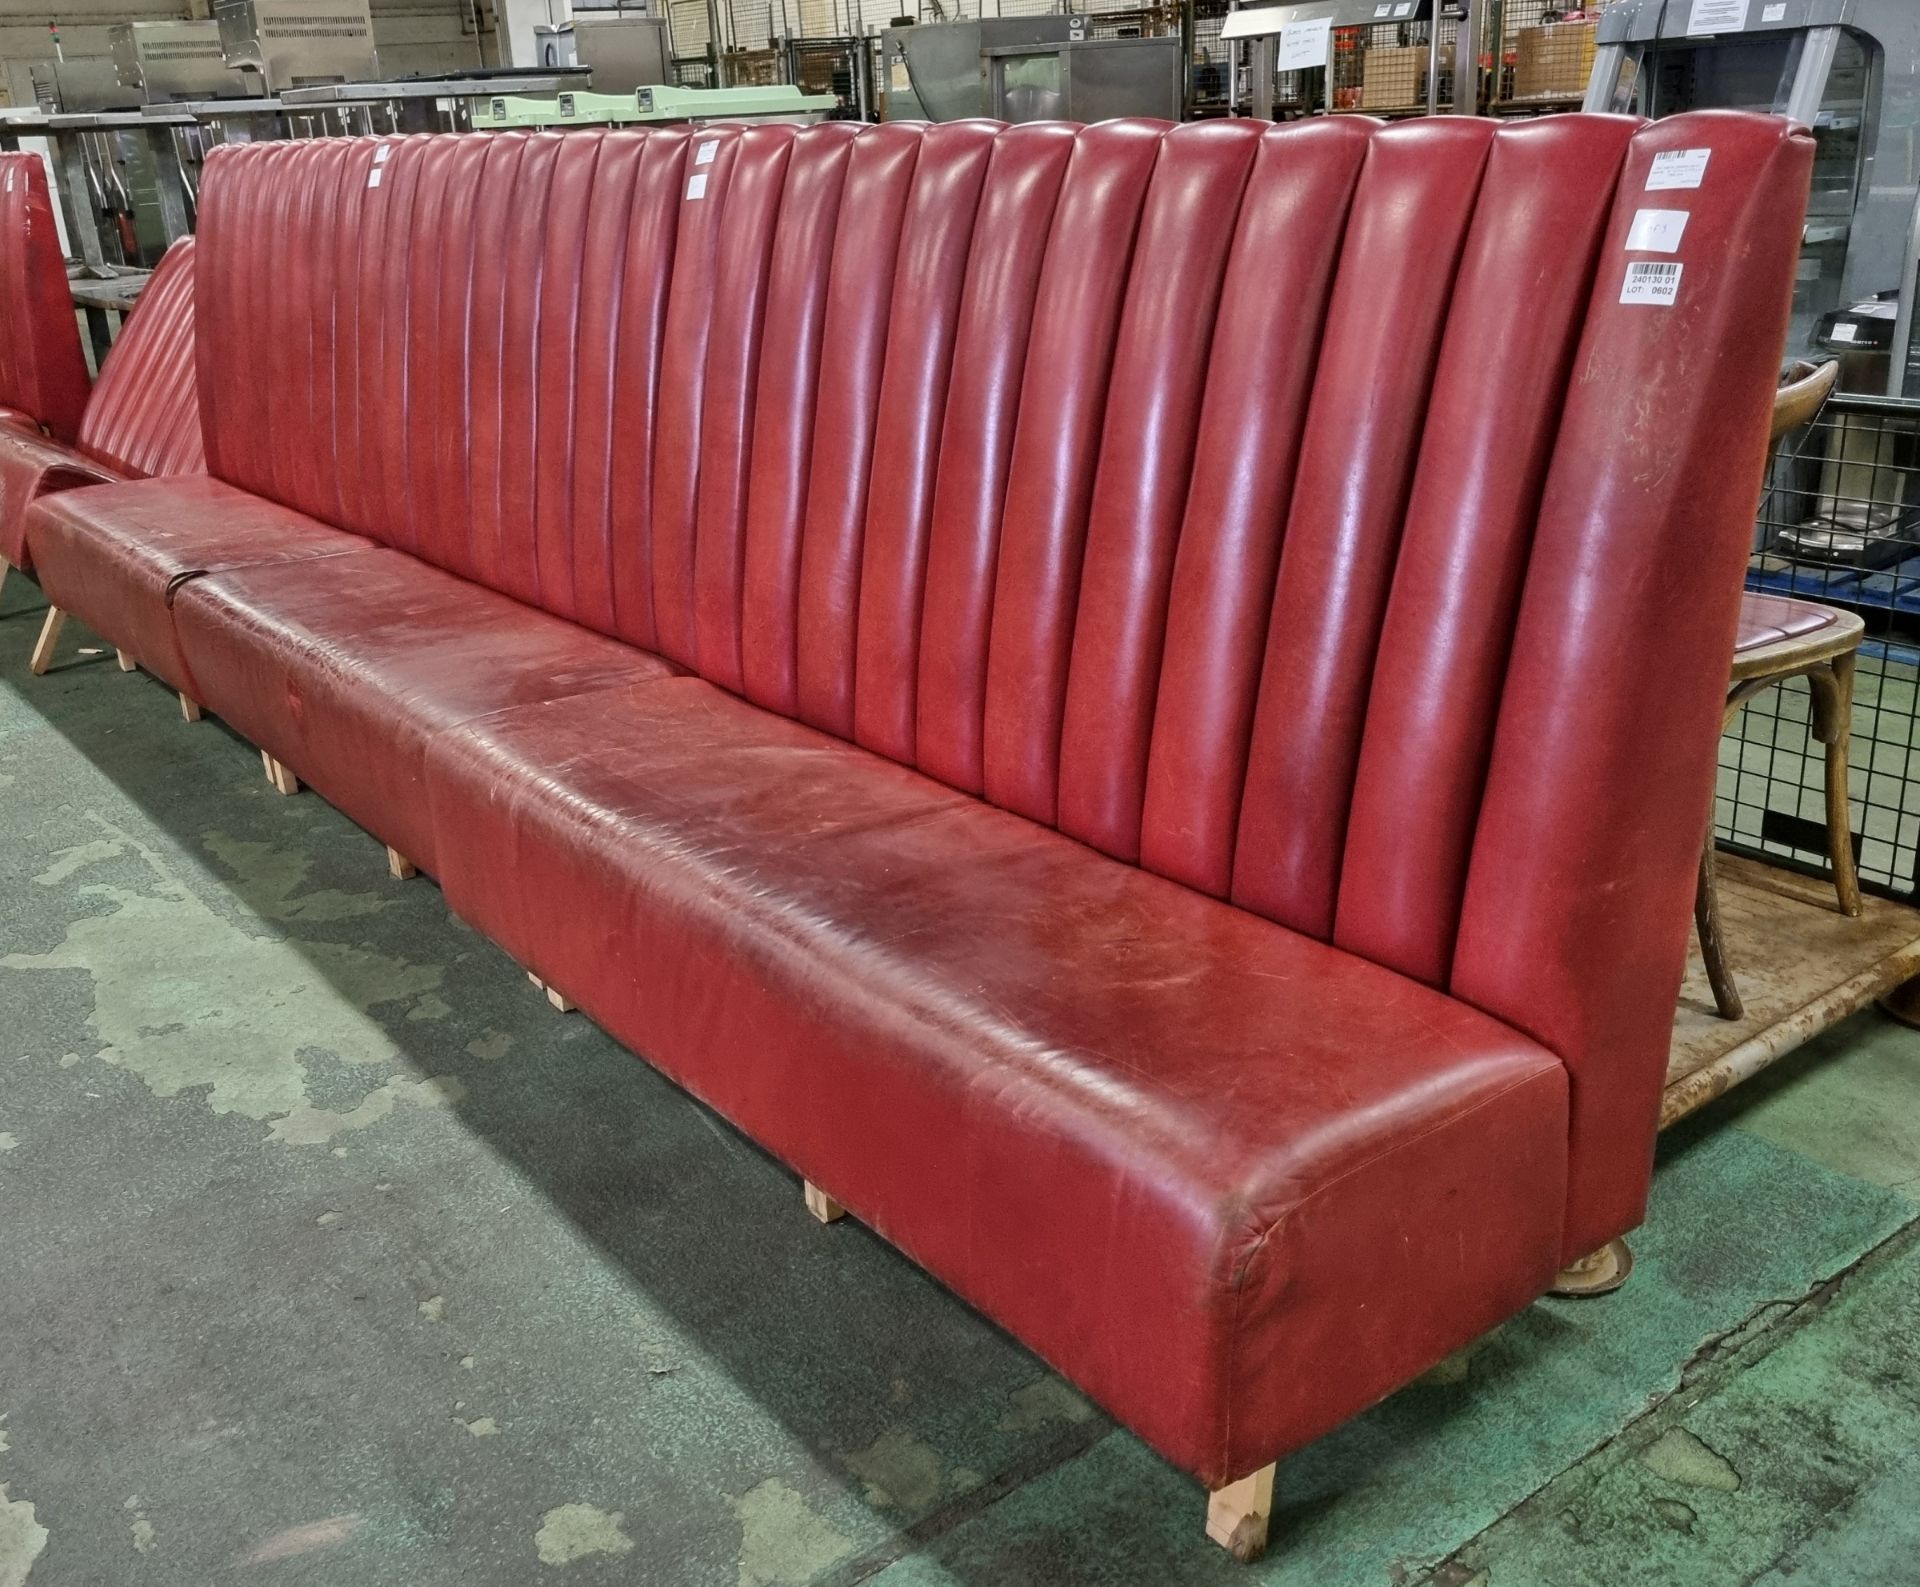 Red leather padded bench seating - Bild 2 aus 5